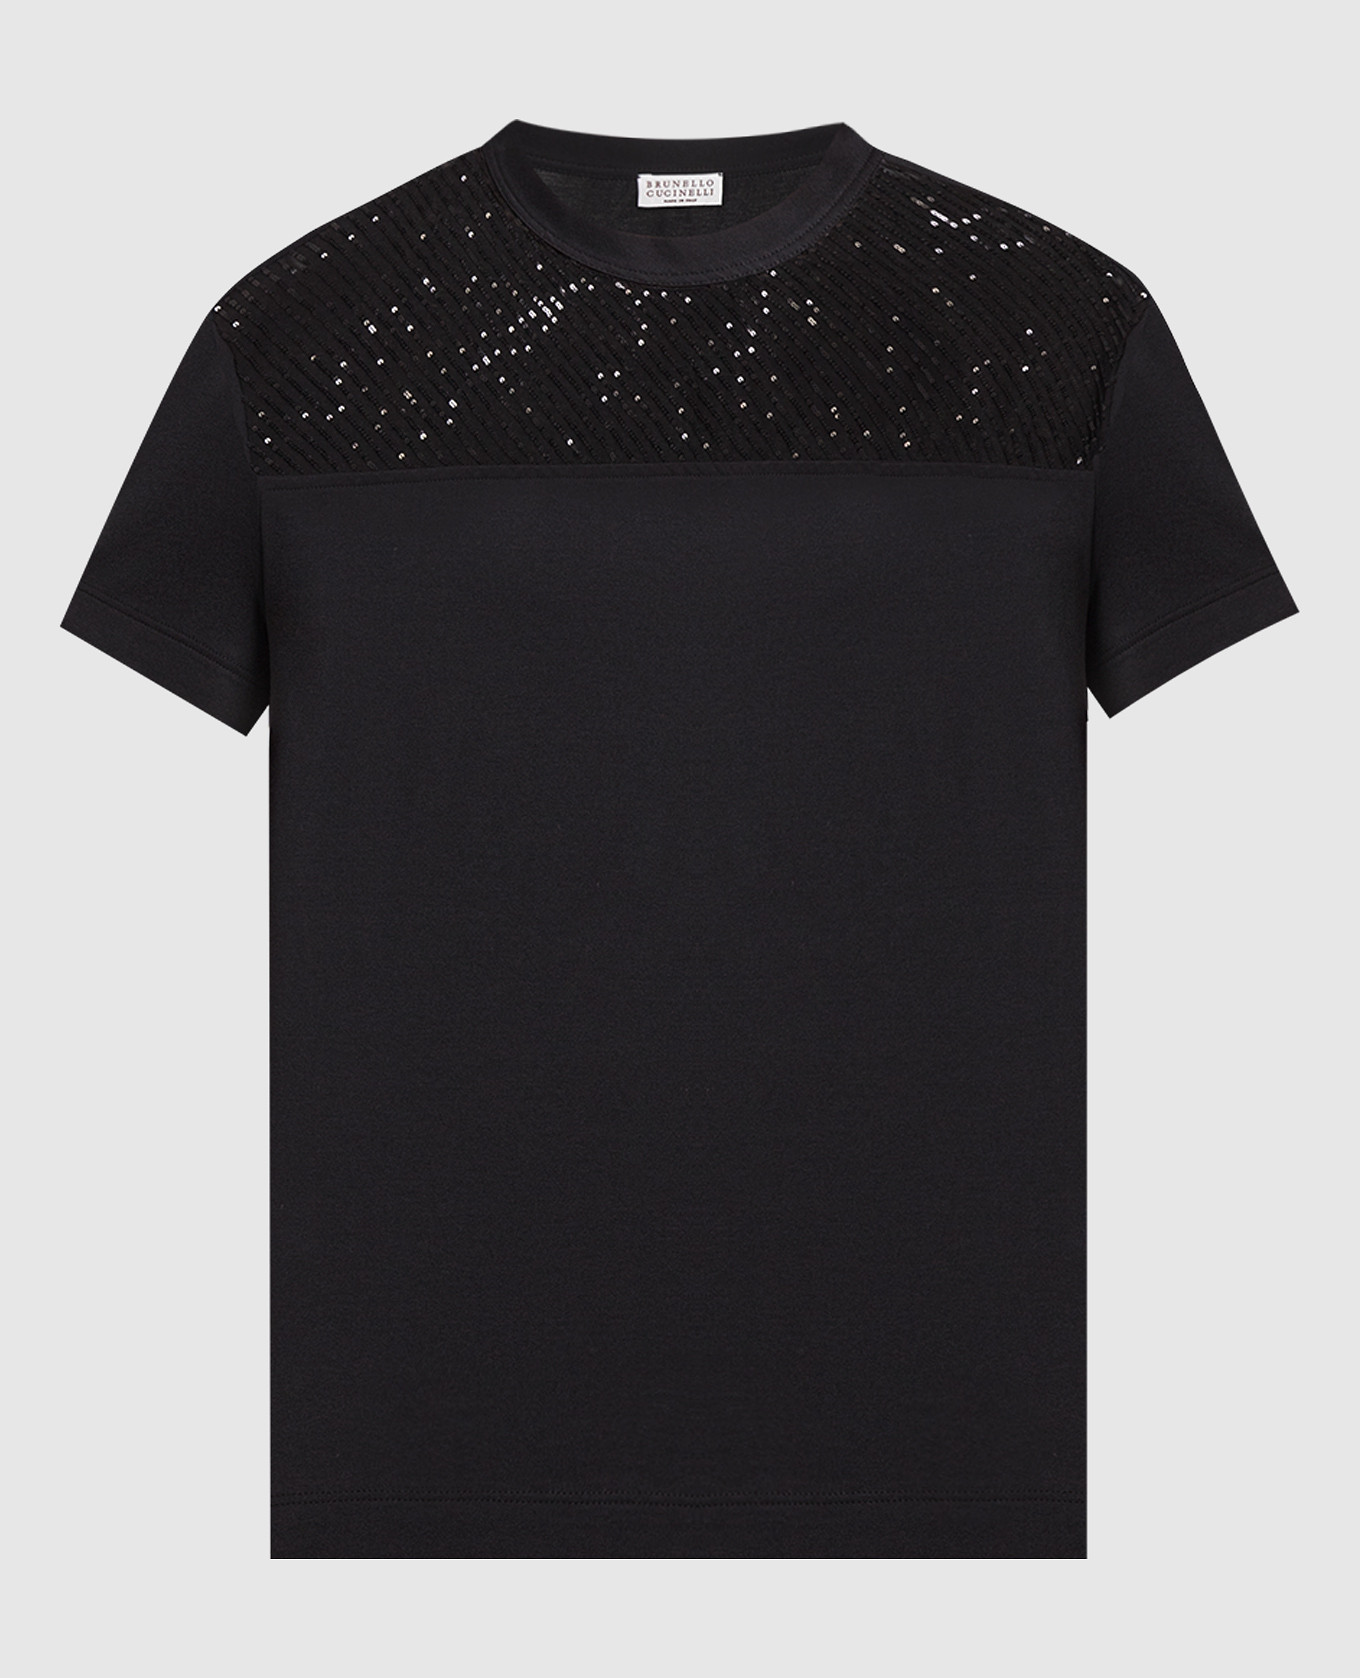 Black t-shirt with sequins